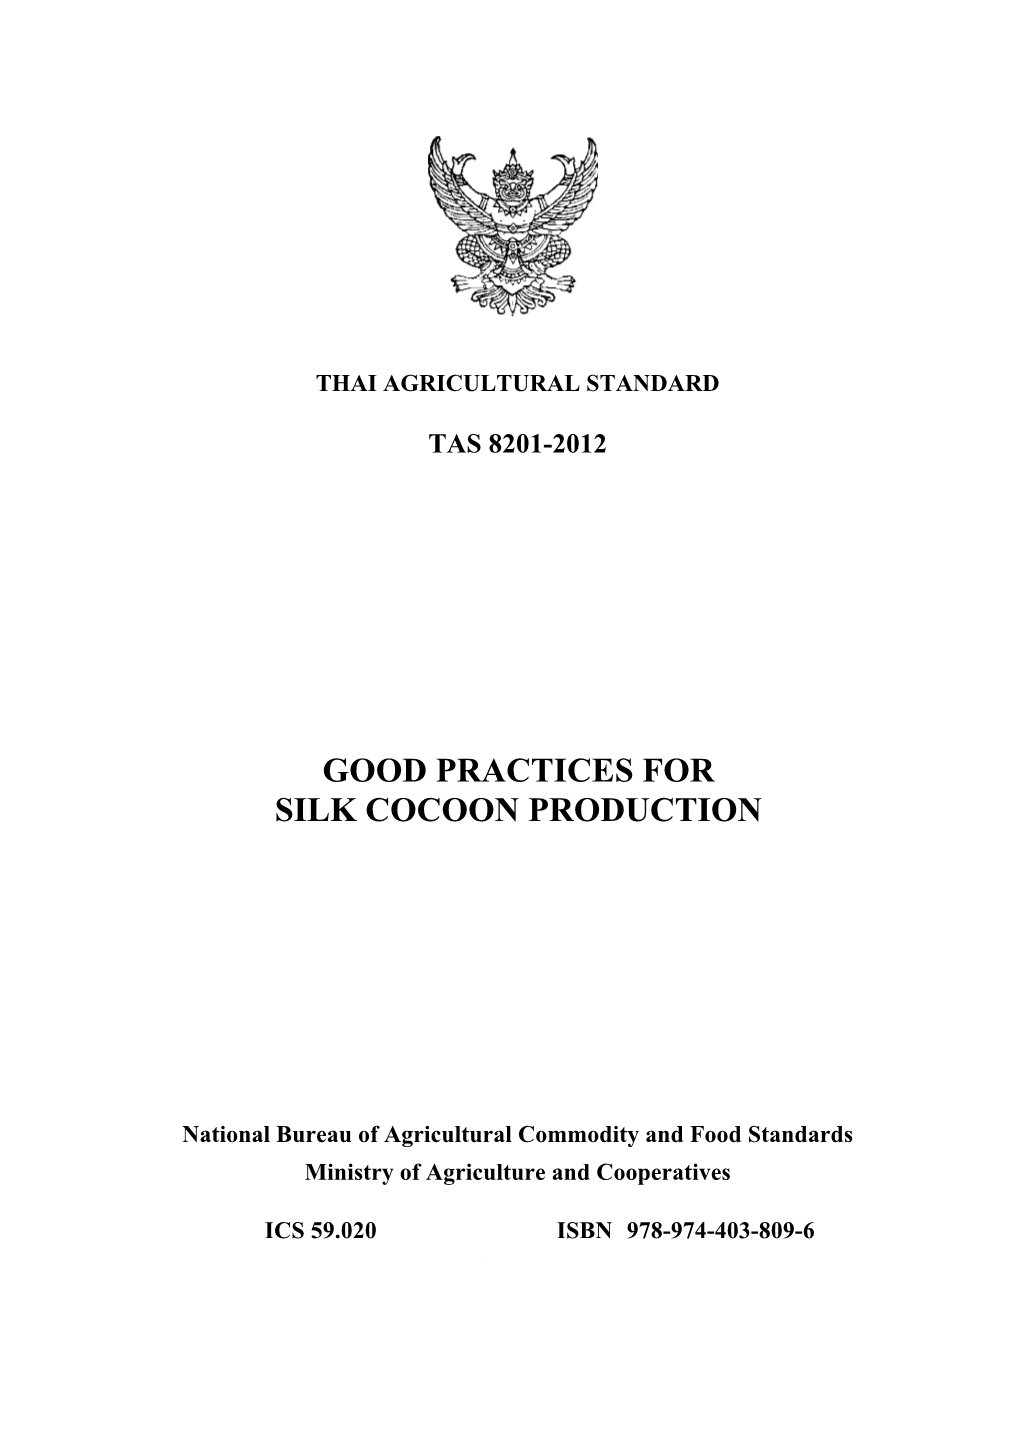 Good Practices for Silk Cocoon Production